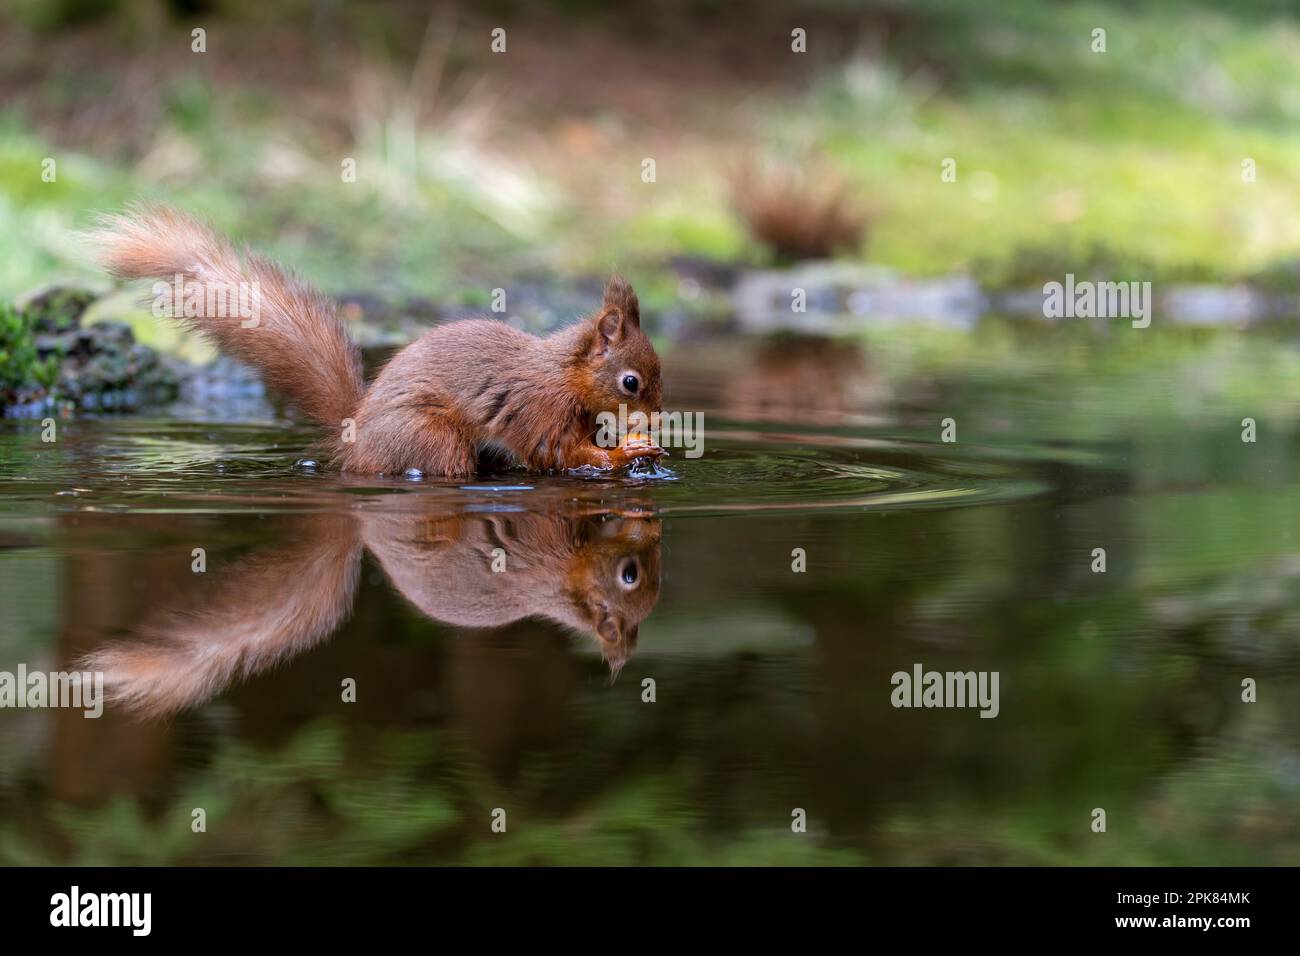 A British Red Squirrel, (Sciurus vulgaris), standing in a pool of water eating a Hazelnut, (with reflection) Stock Photo